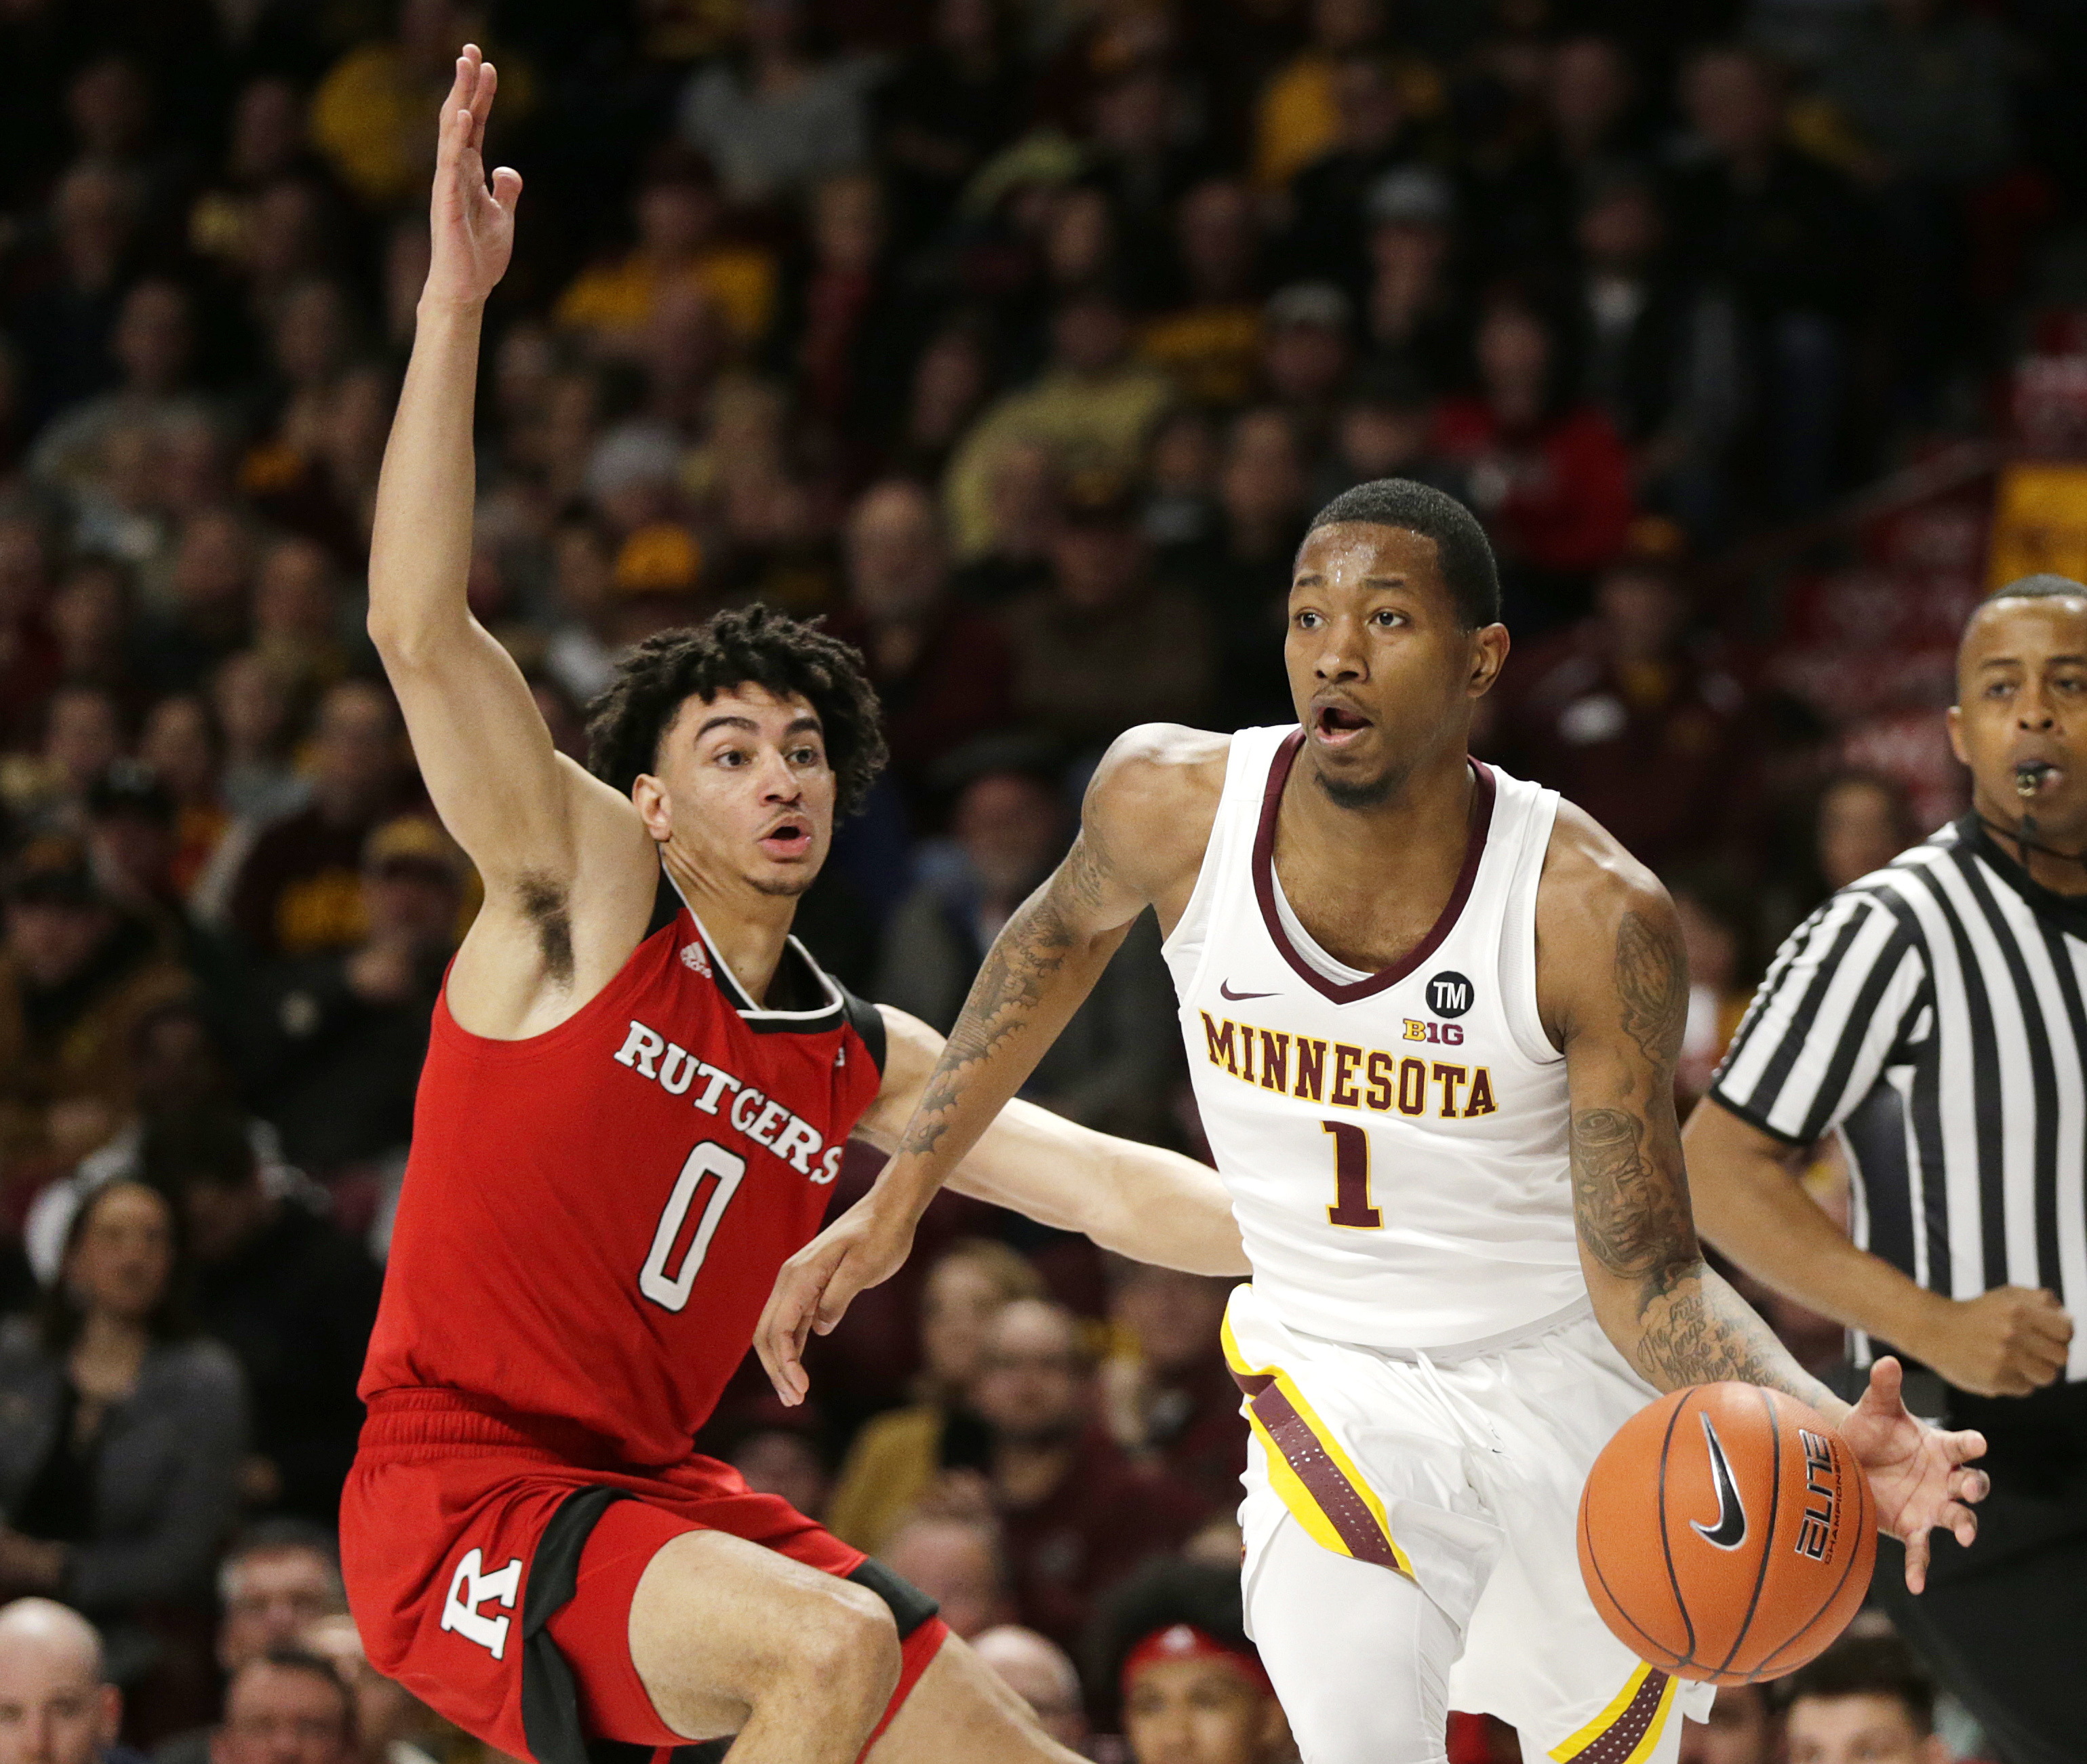 Coffey scores 29 as Gophers top Rutgers 88-70